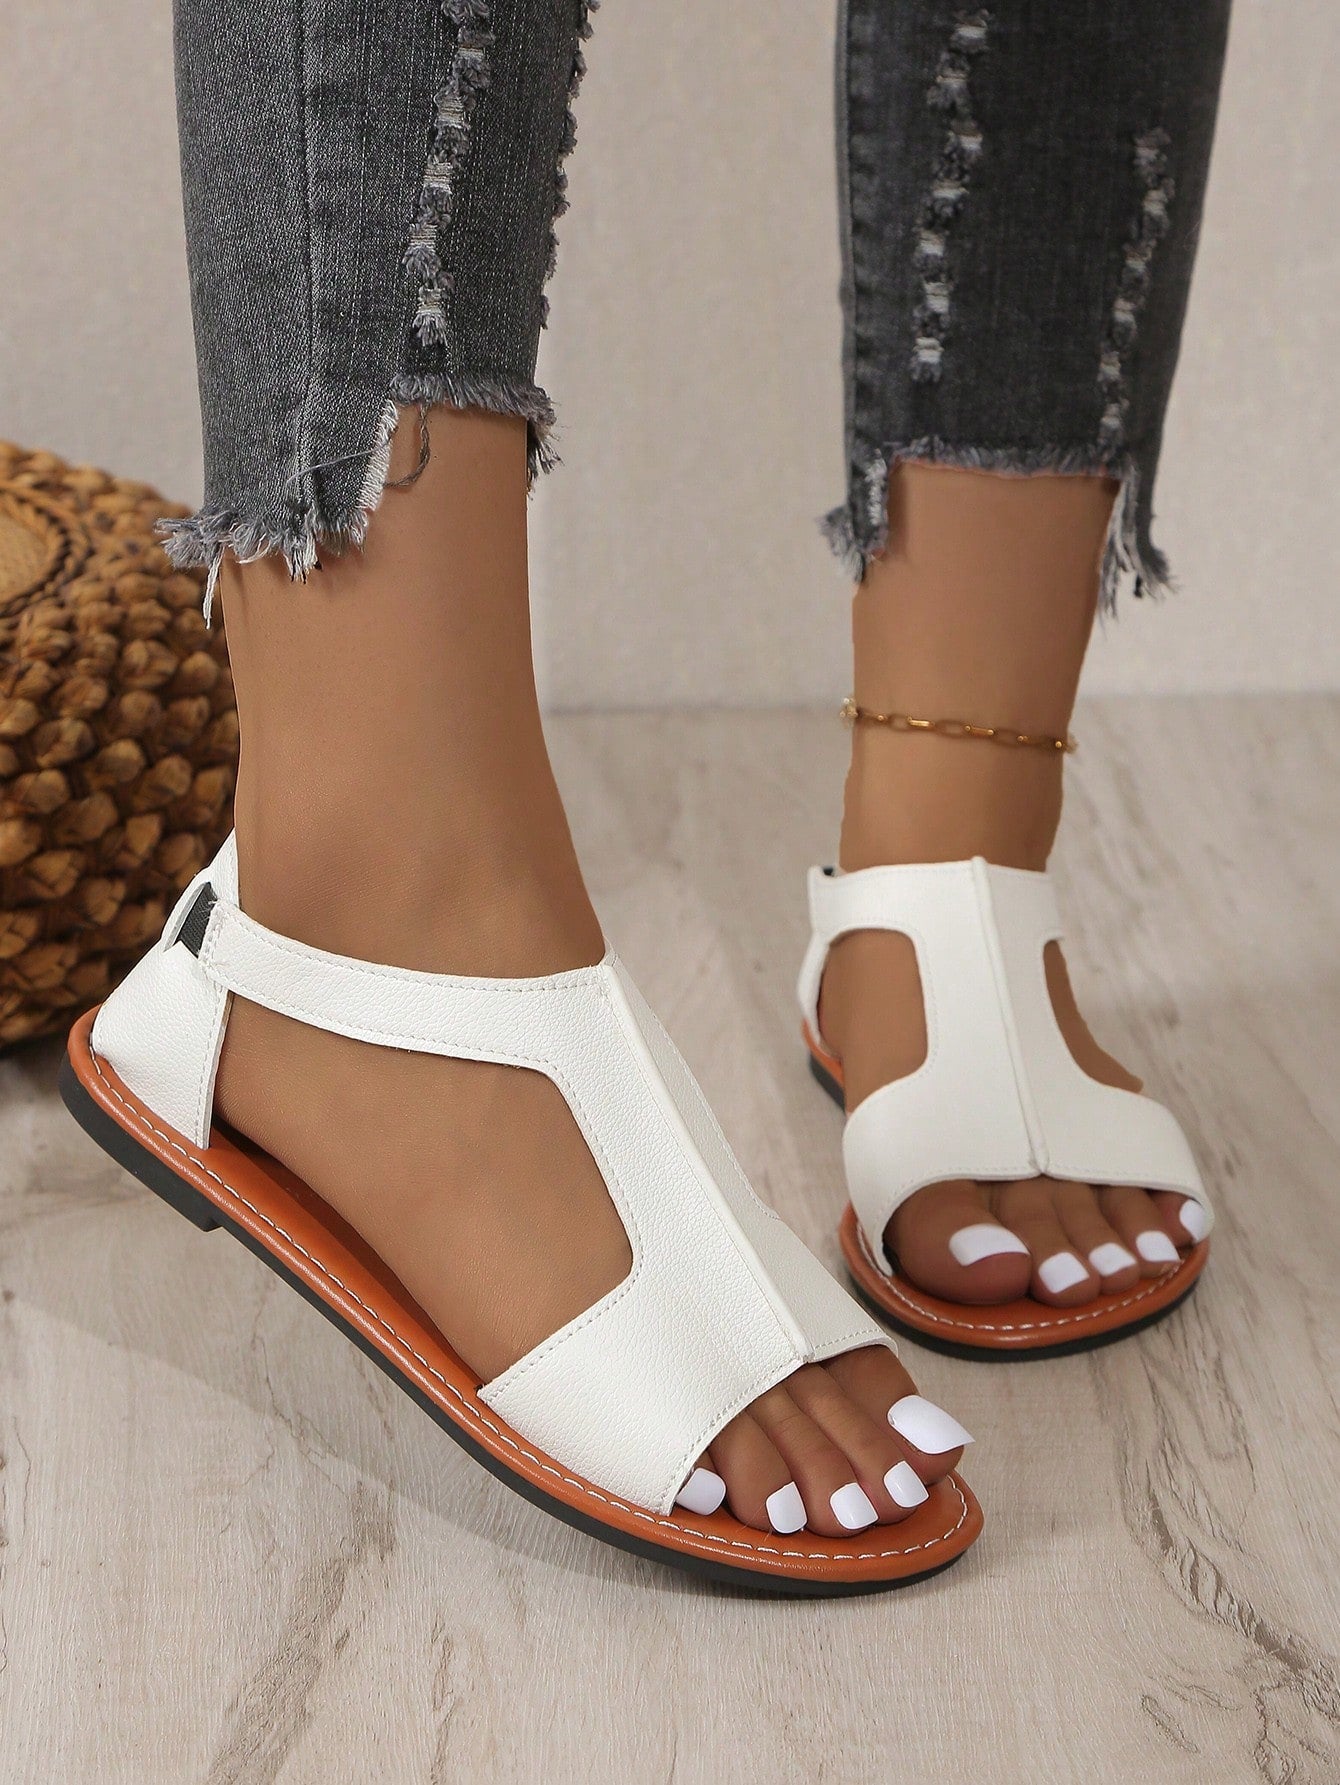 New Women Casual Comfortable Slip-On Flat Sandals With College Style Made Of Leather, Ideal For Beach Party And Music Festival-White-5